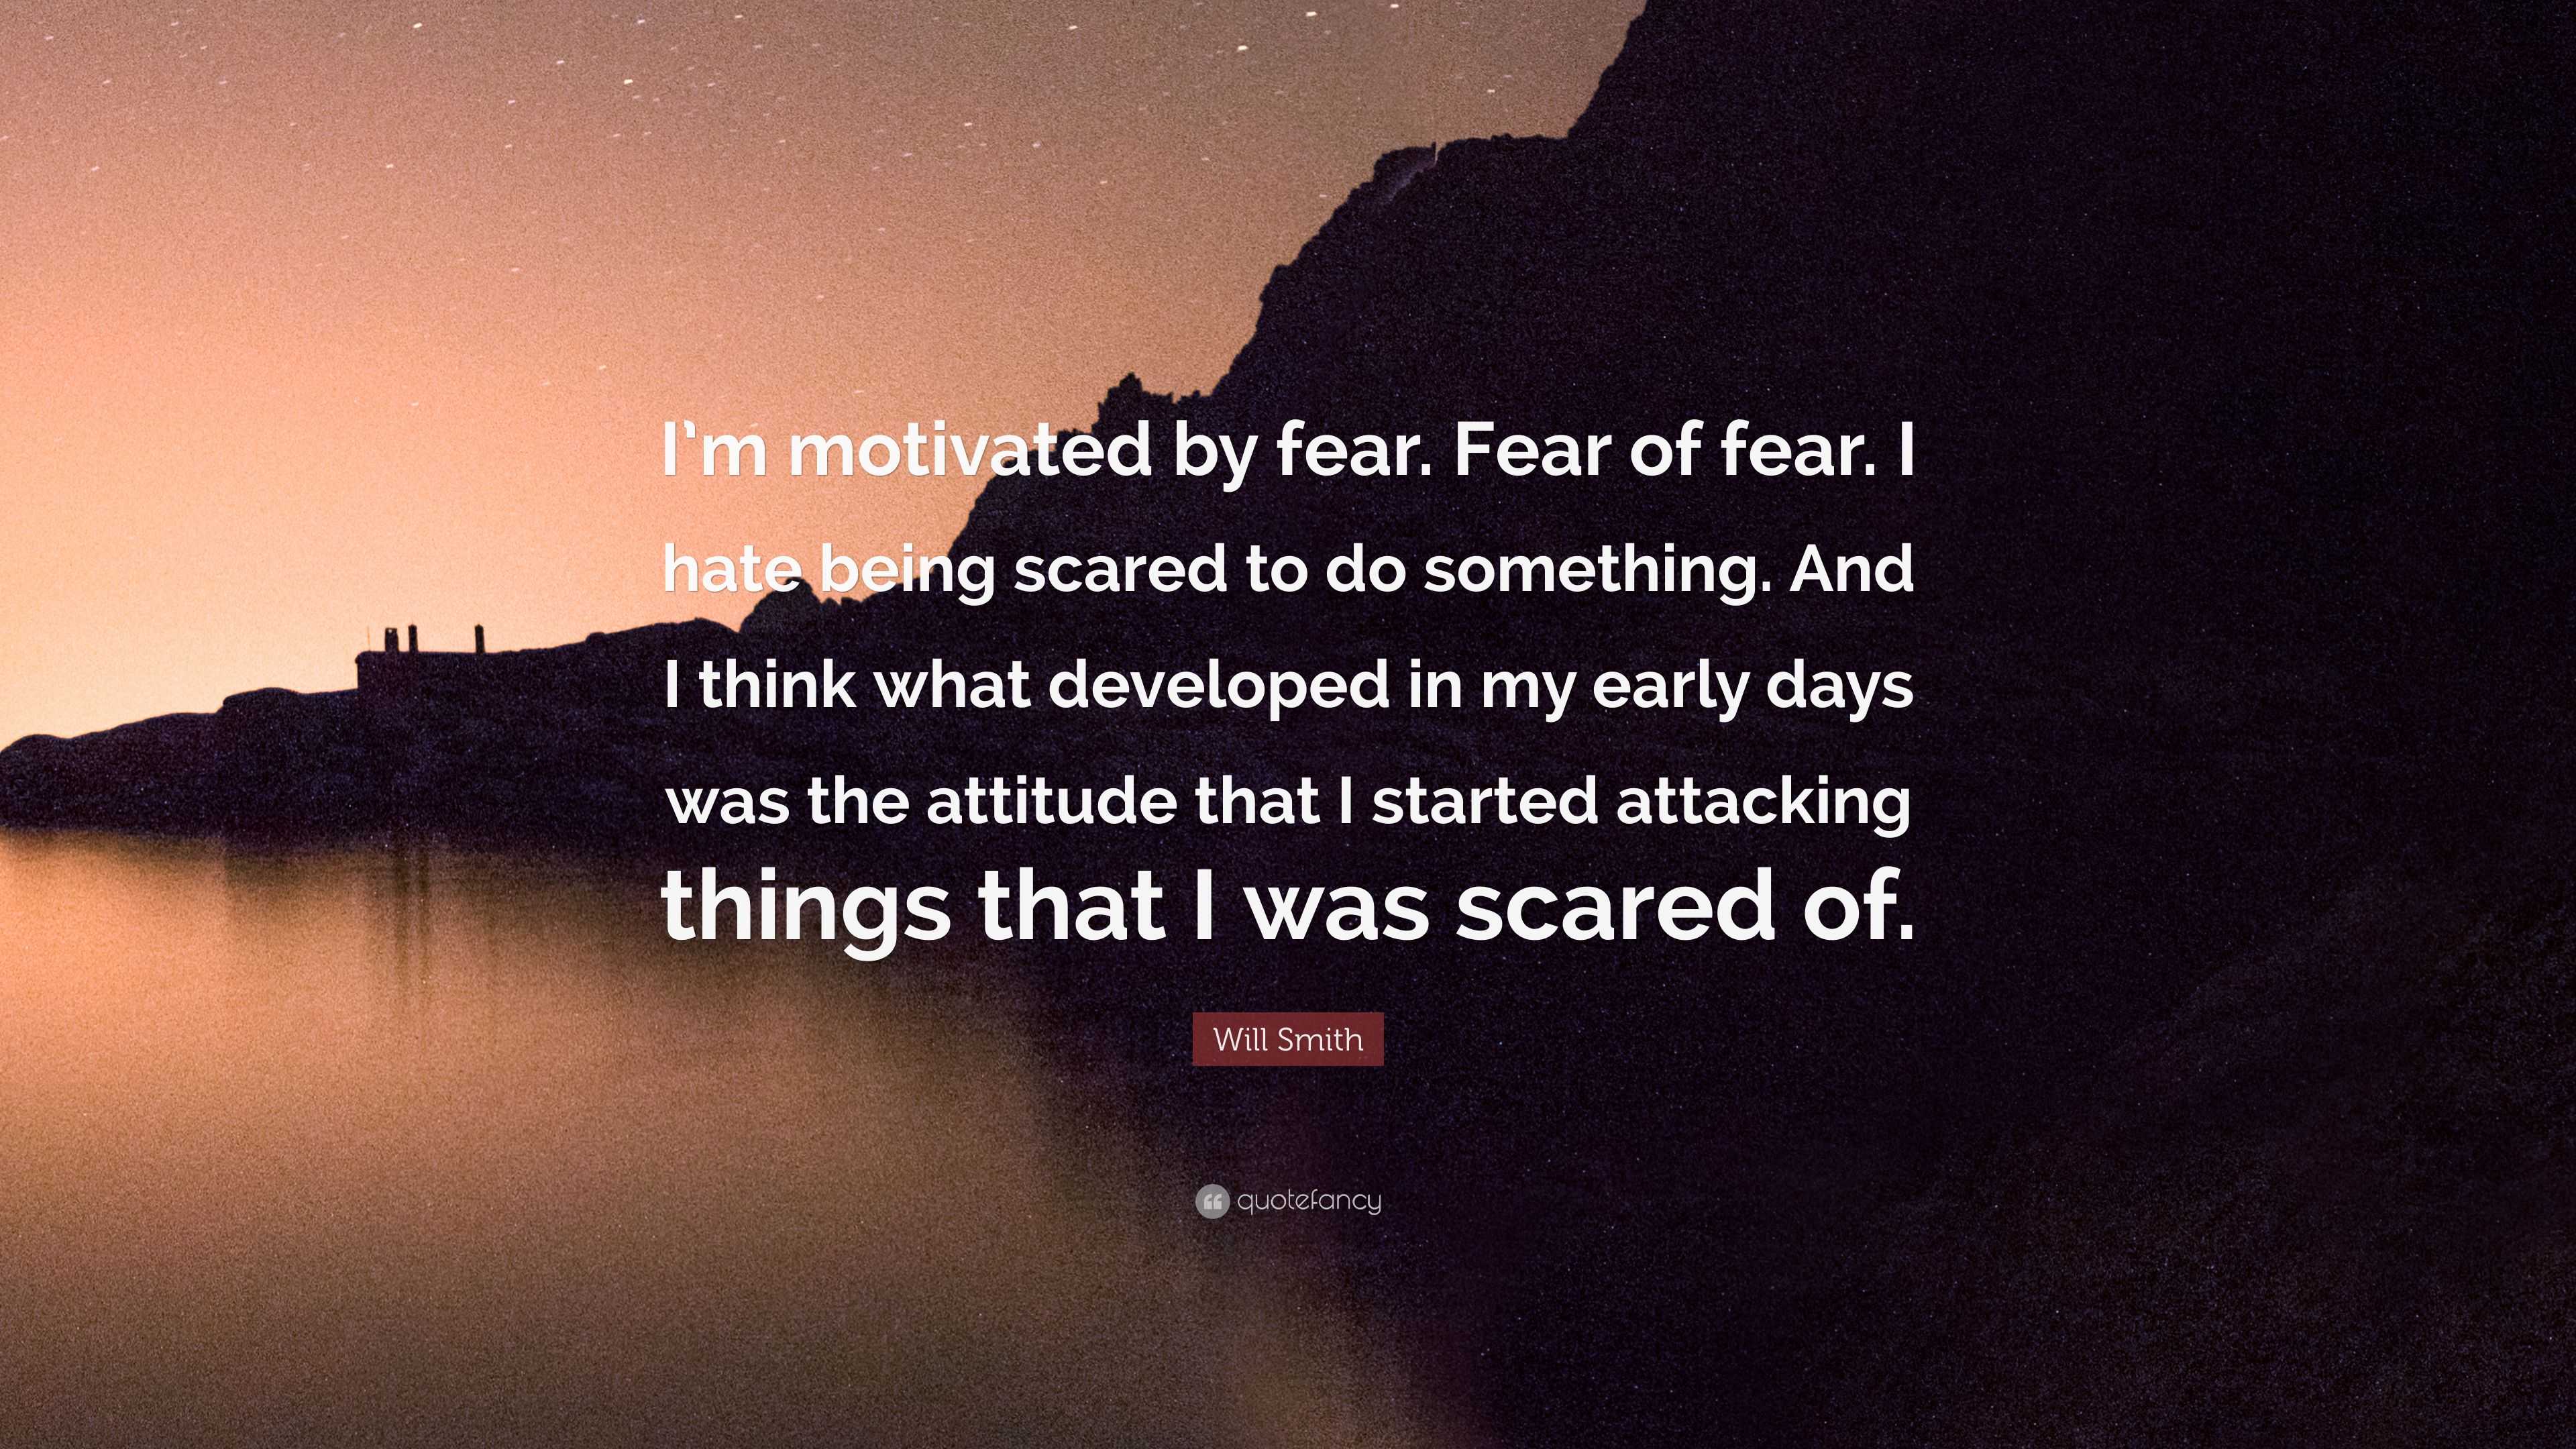 Will Smith Quote: “I’m motivated by fear. Fear of fear. I hate being